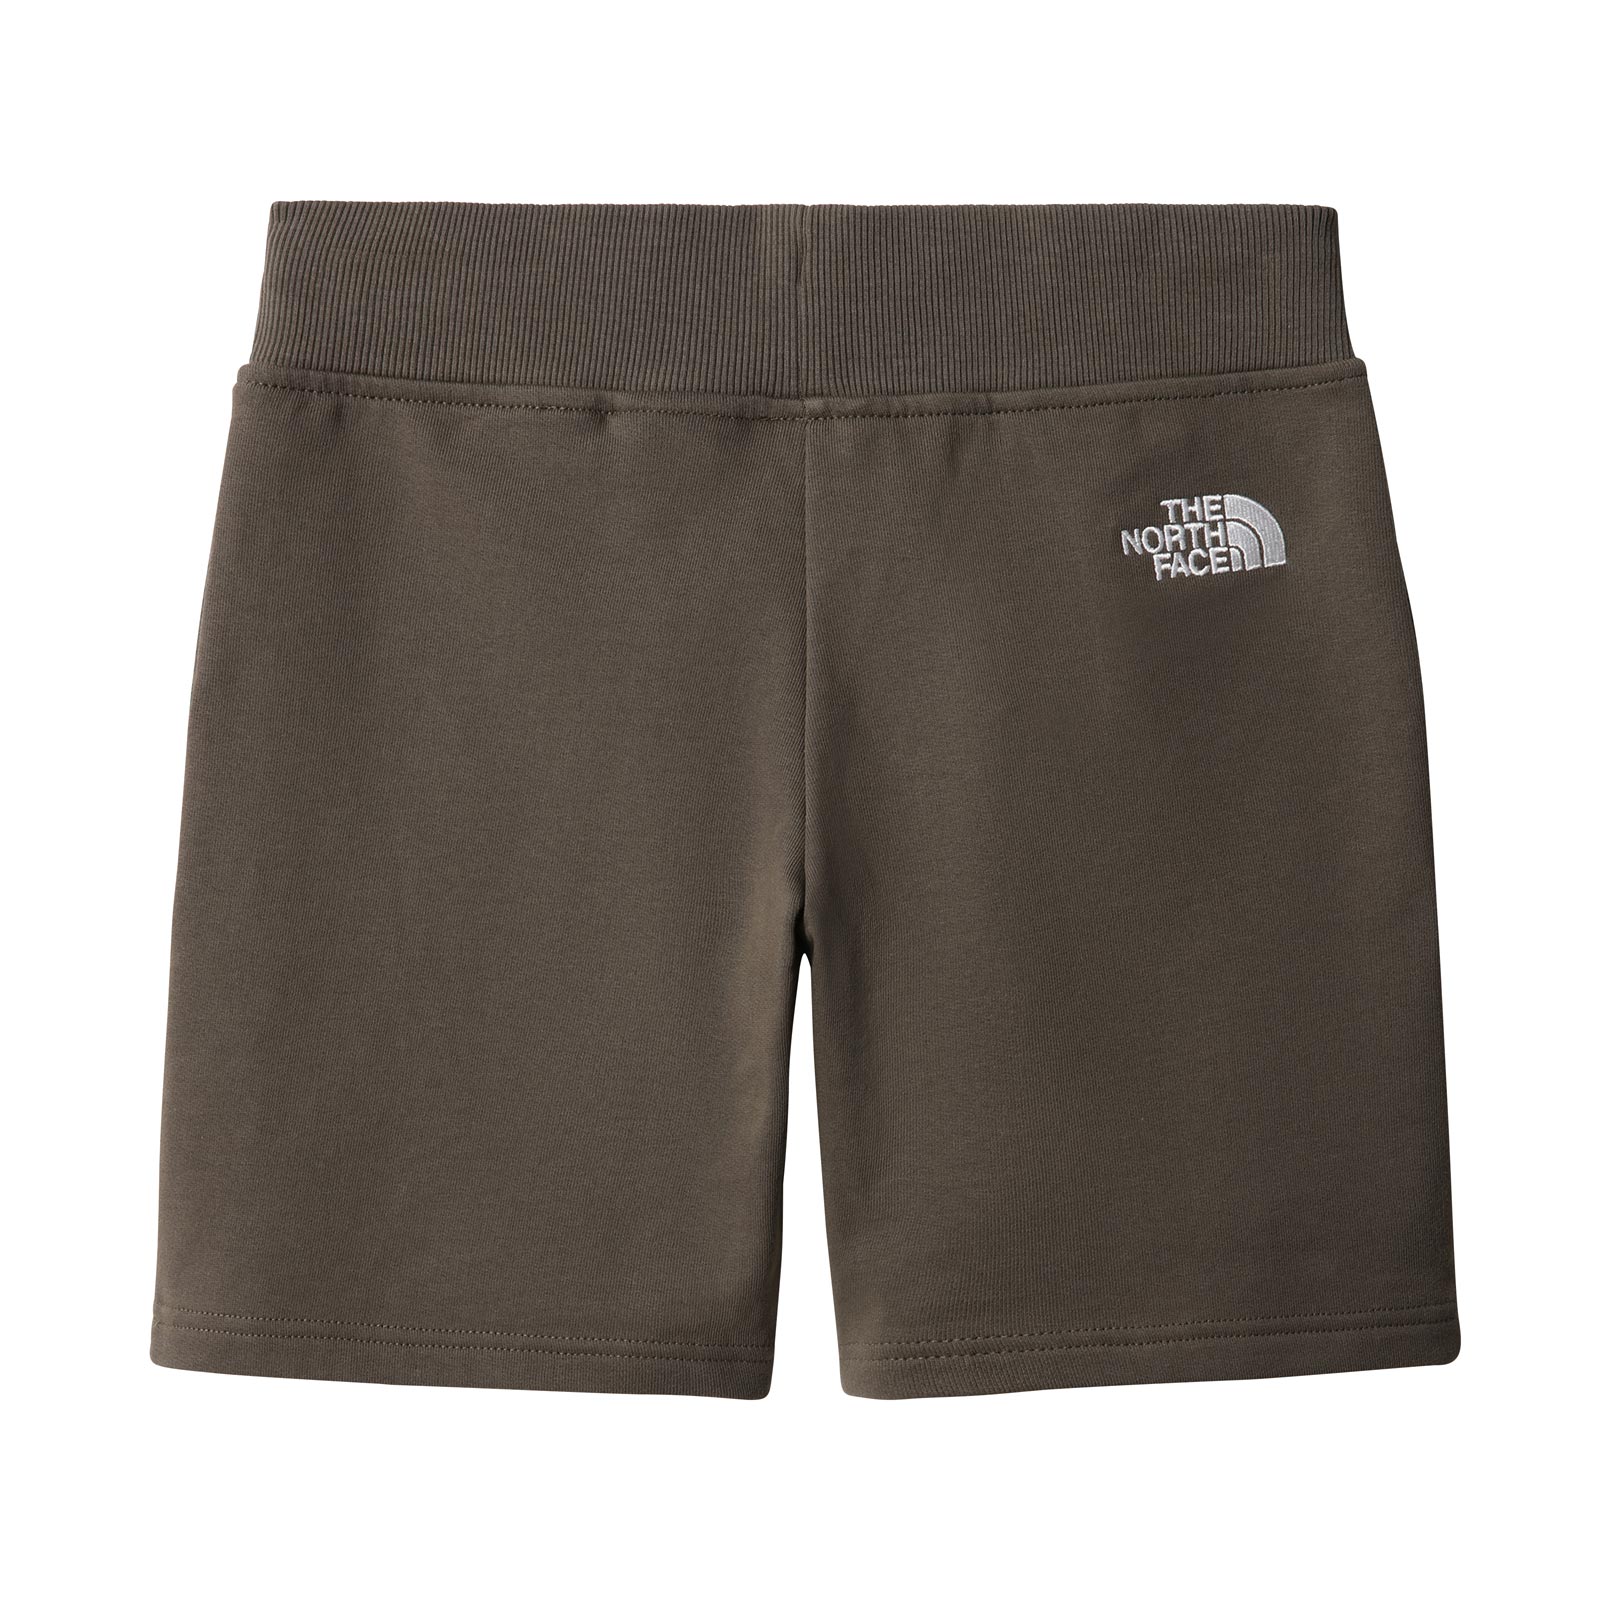 THE NORTH FACE YOUTH DREW PEAK LIGHT SHORTS